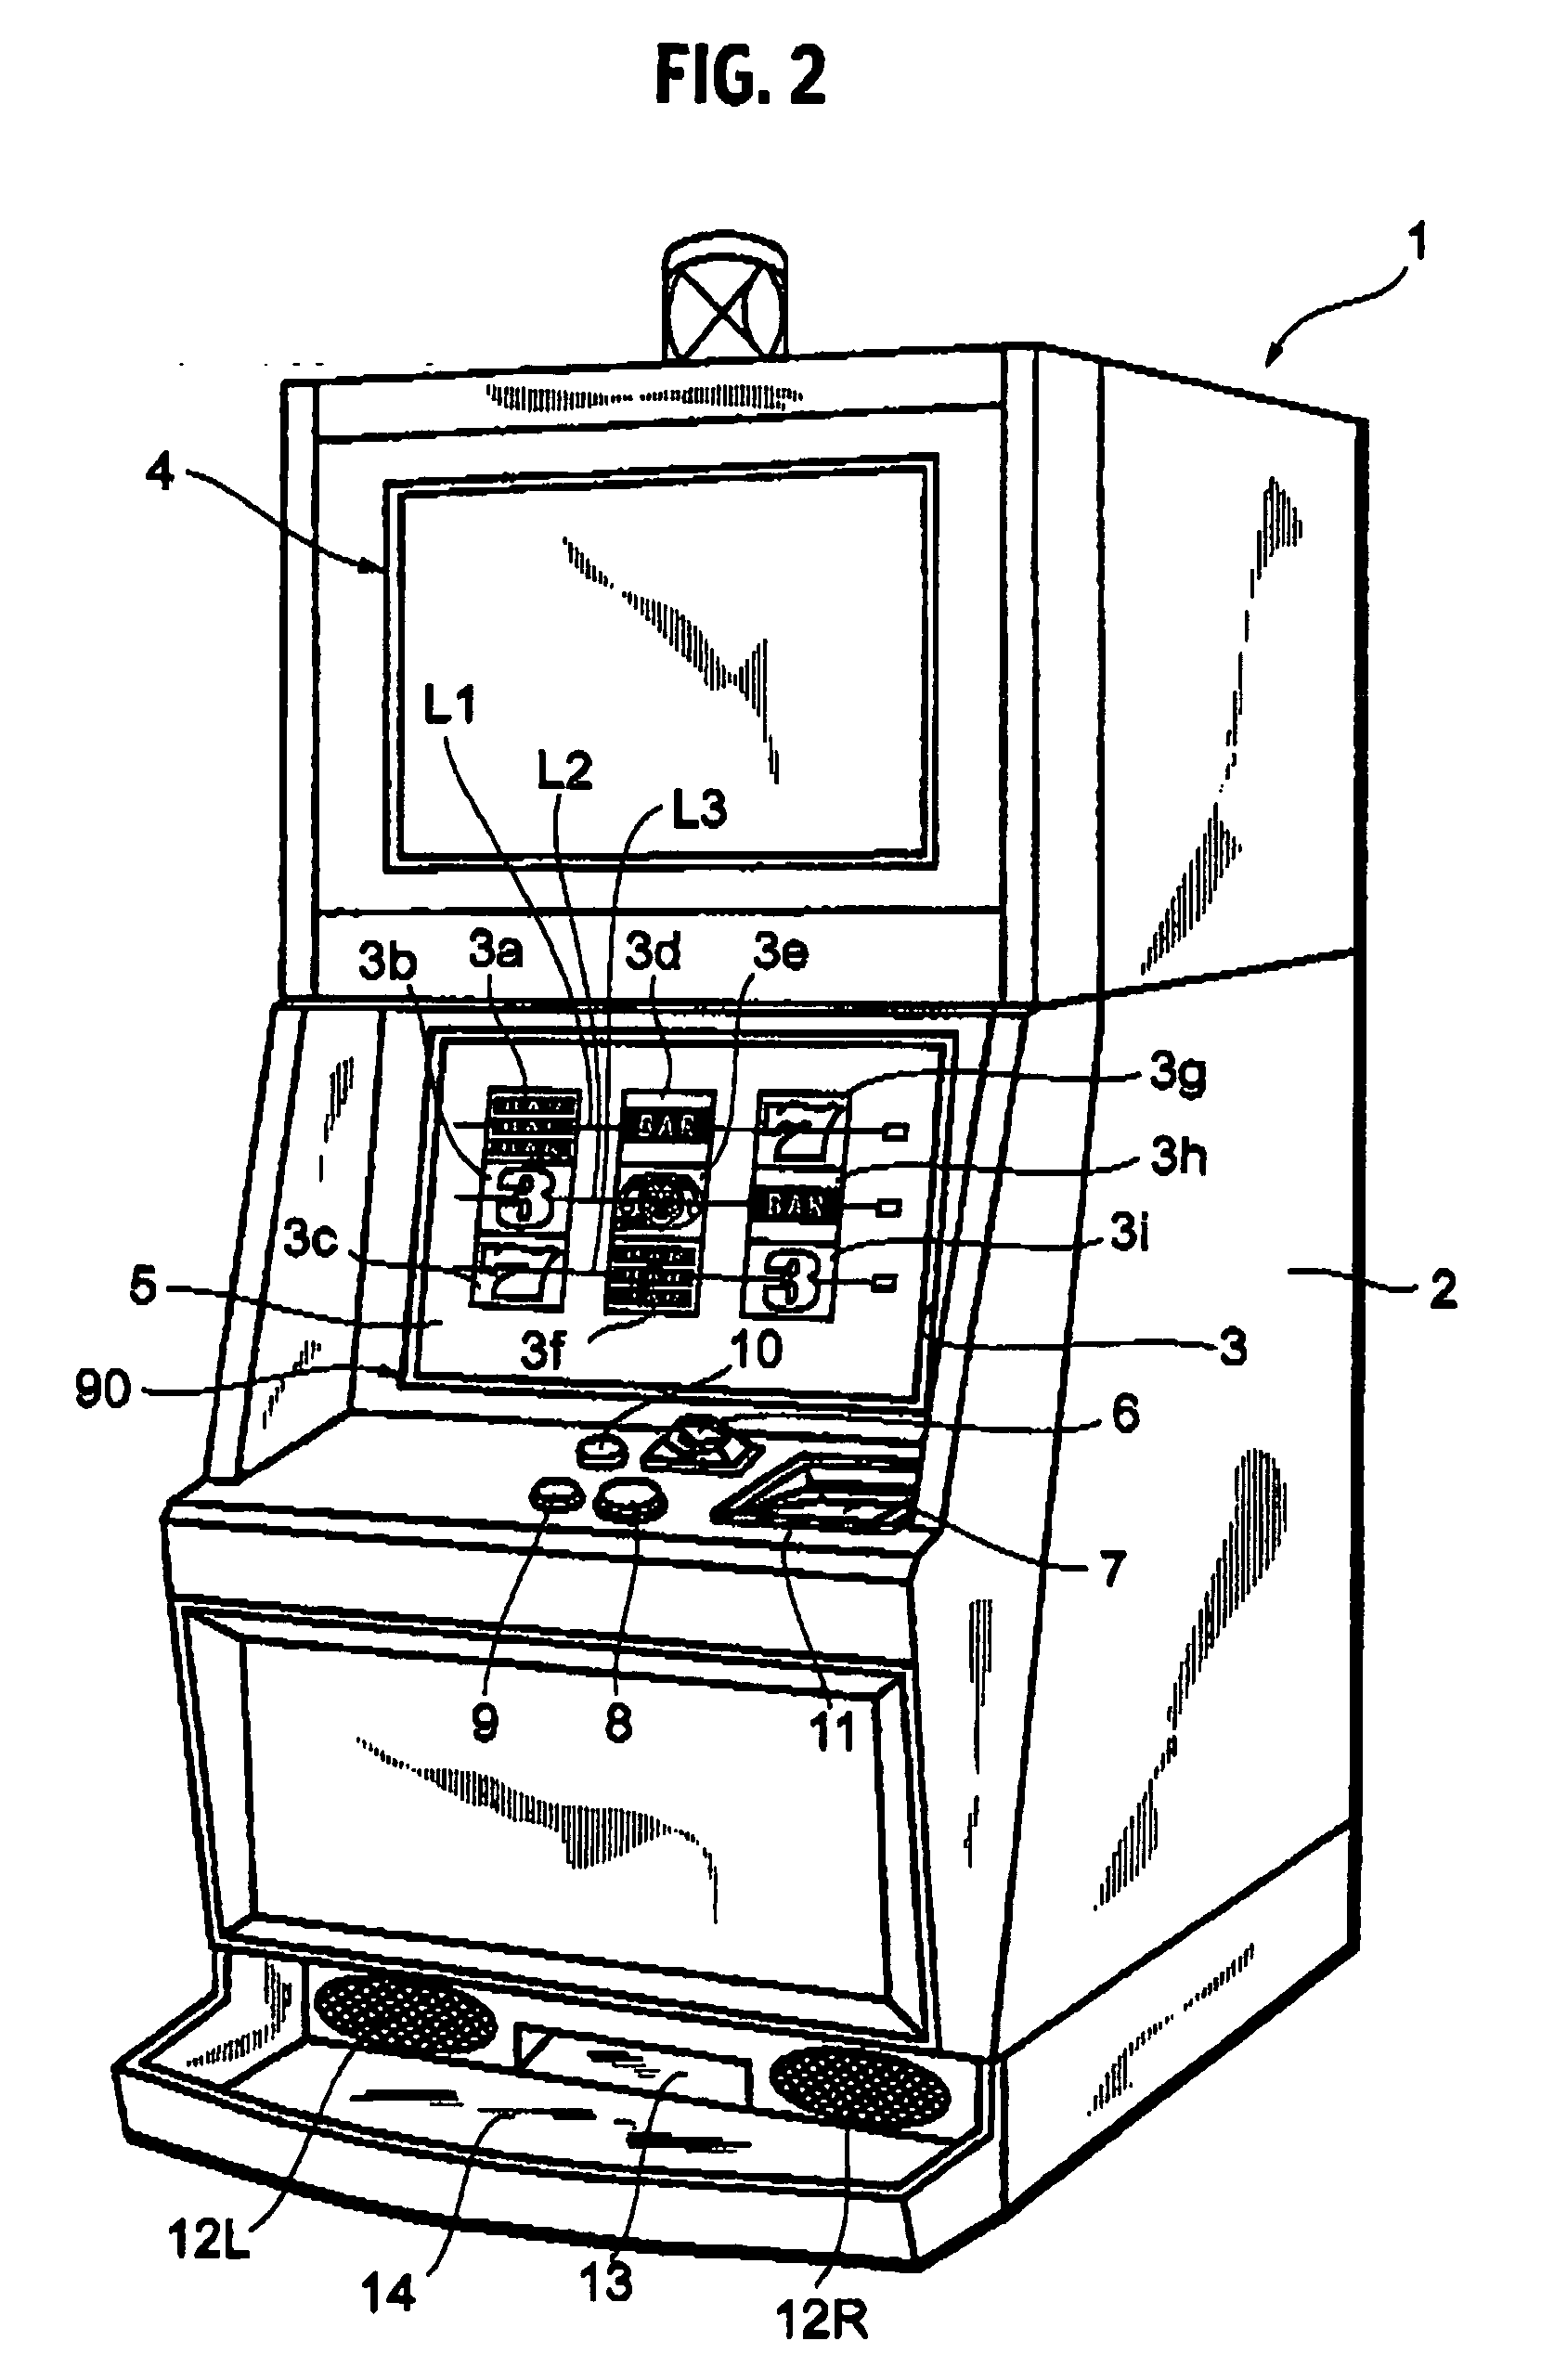 Game effecting system and gaming server